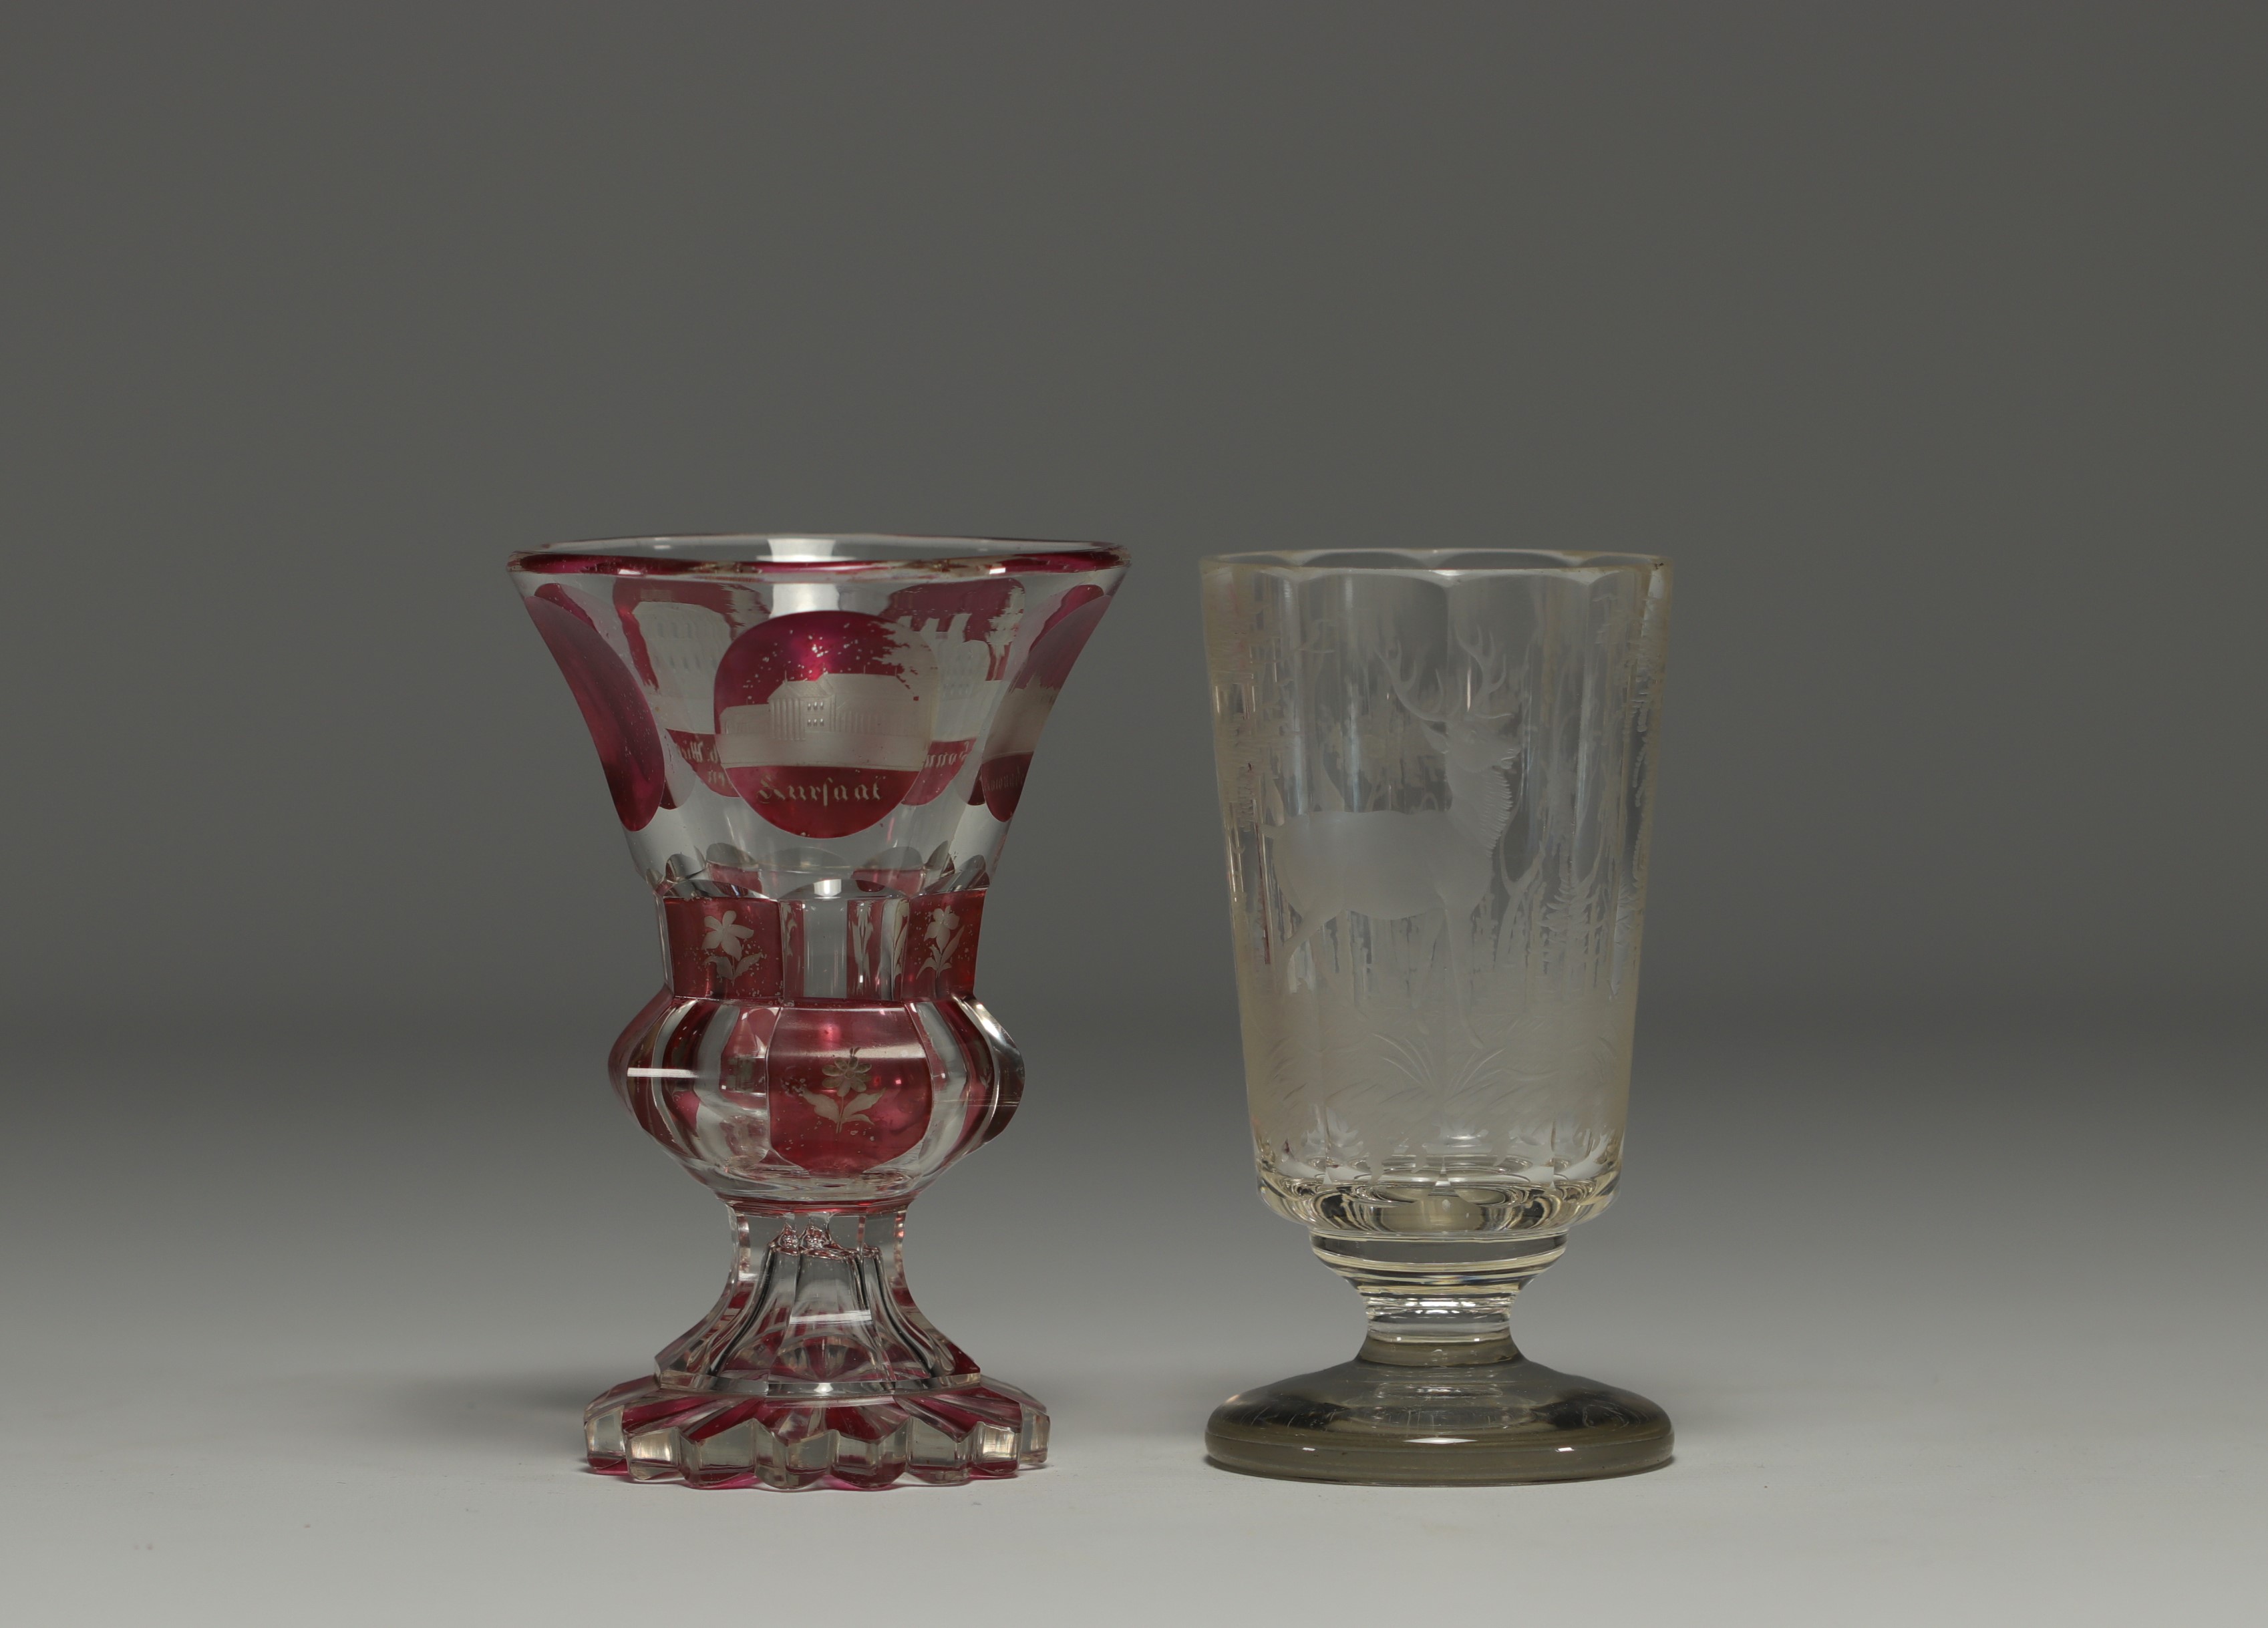 Bohemia - Pair of engraved glasses, one with a deer design and one in multi-layered glass with a cit